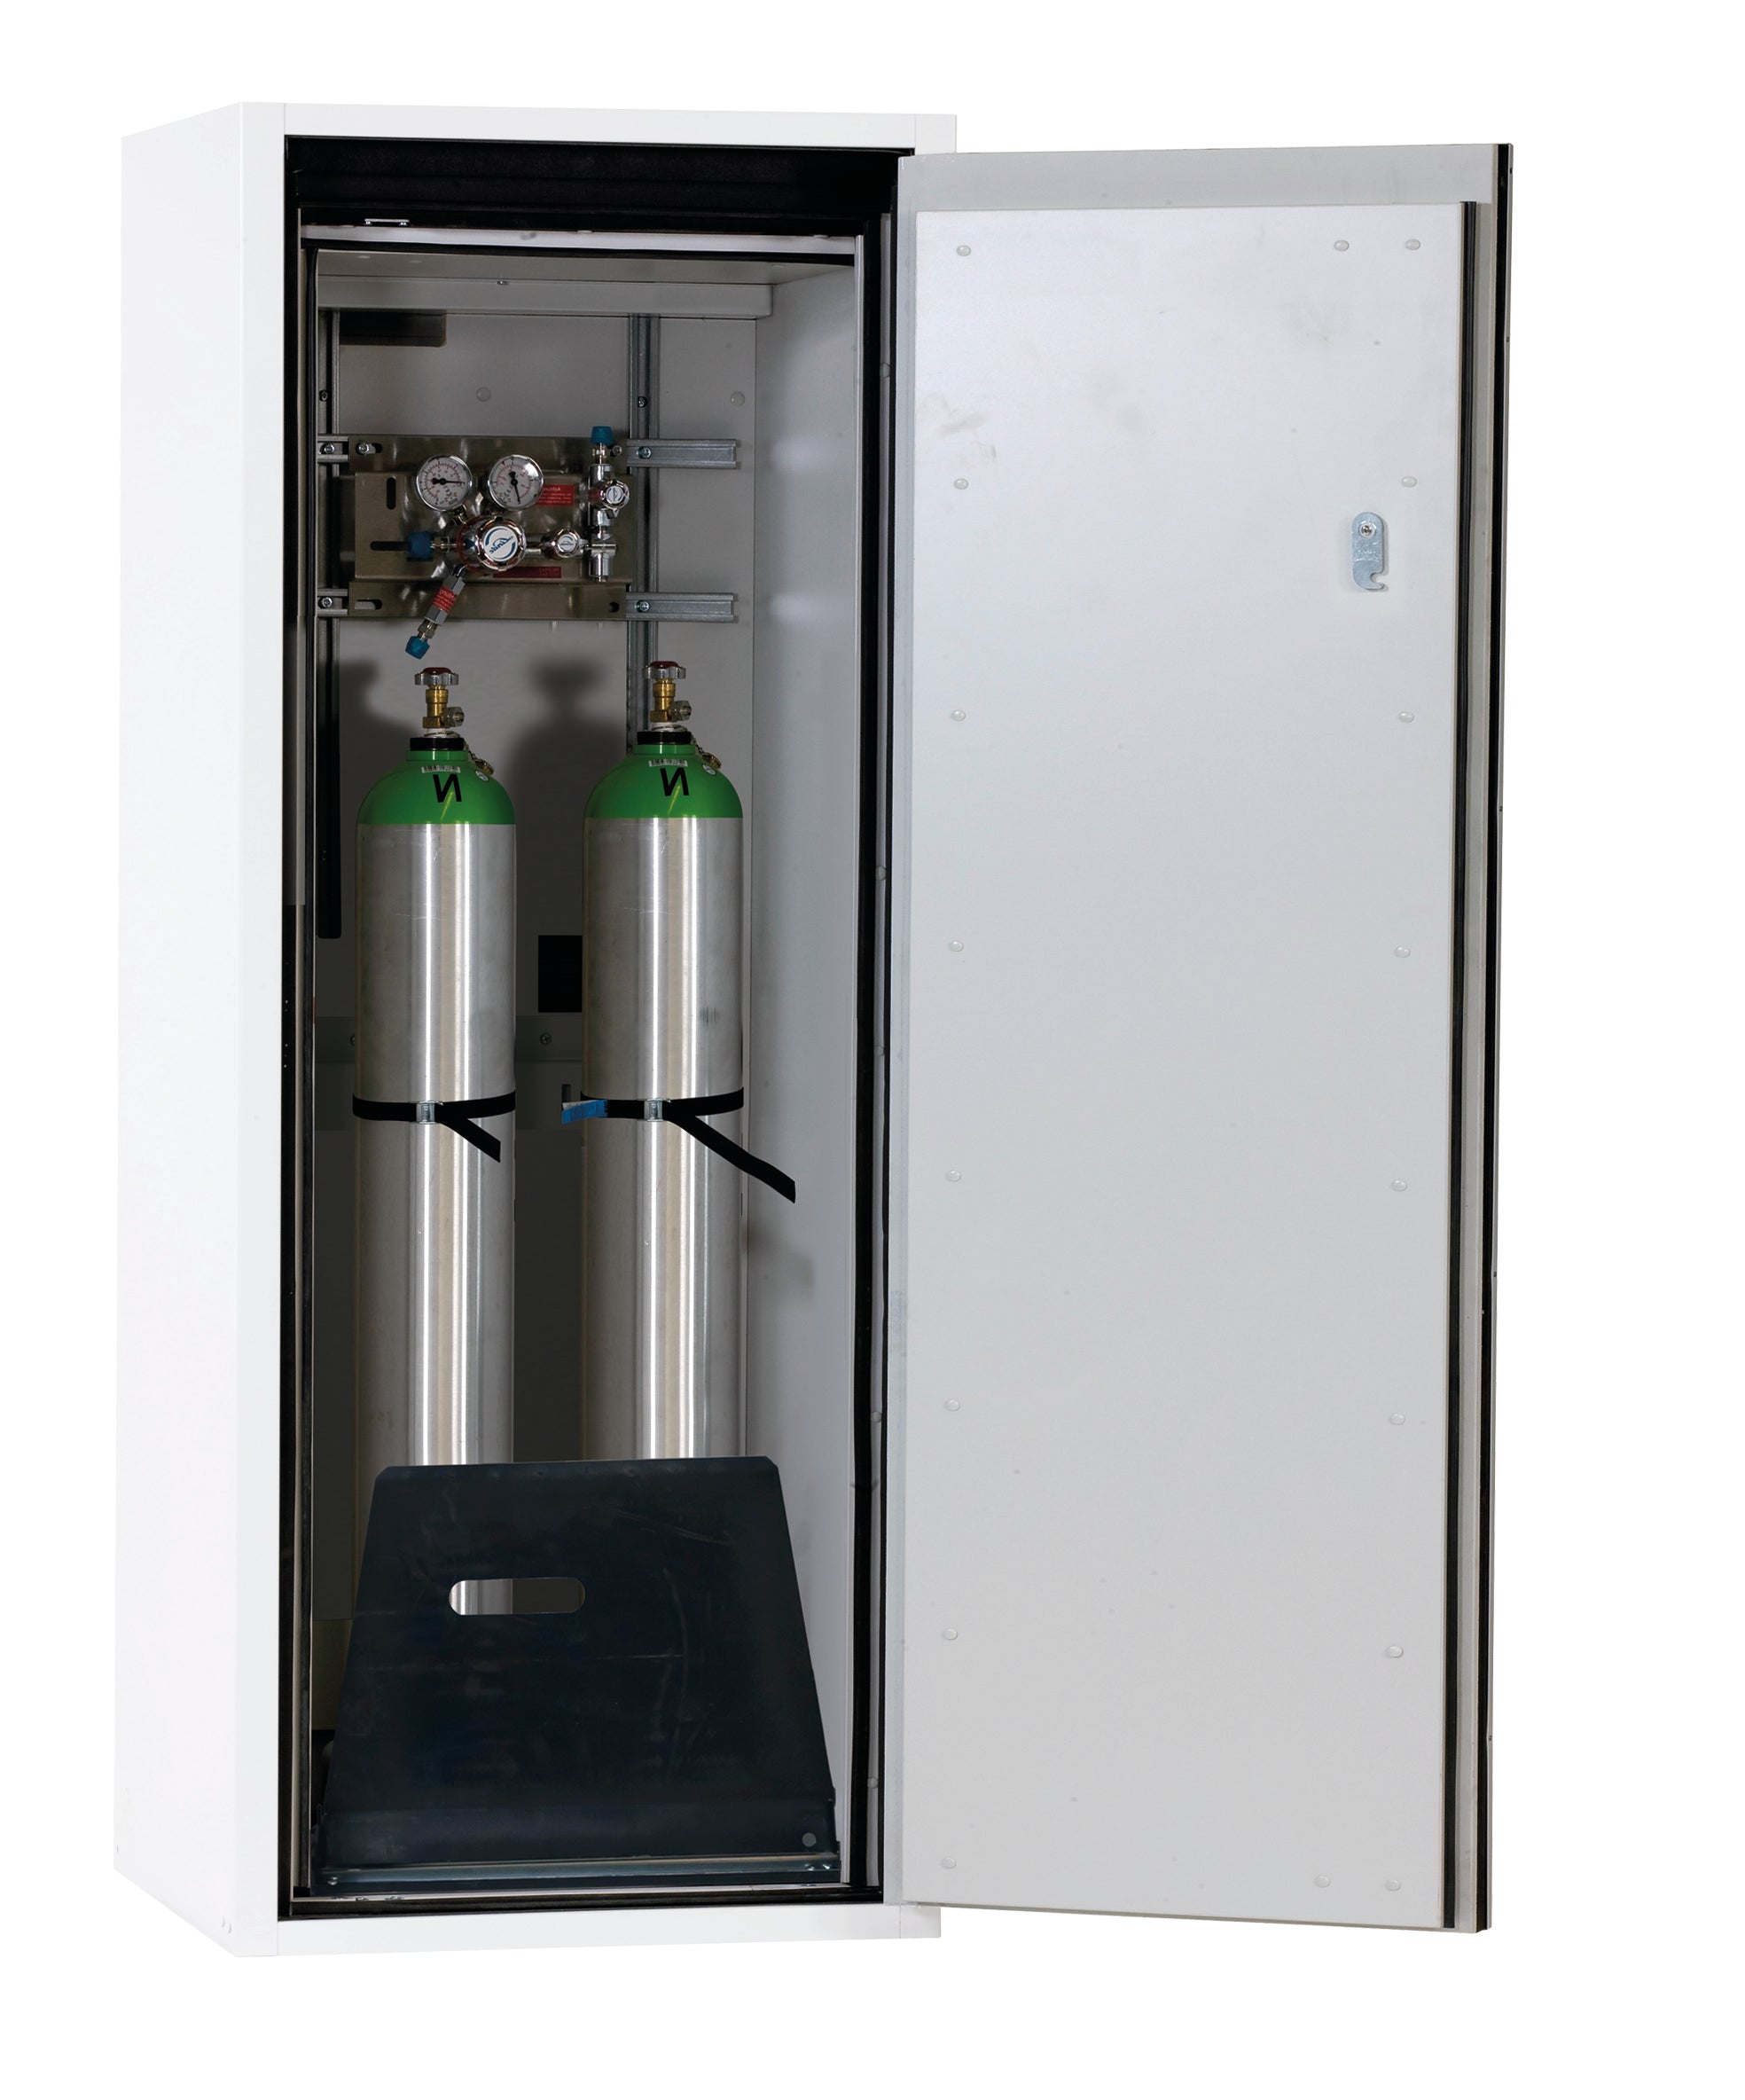 Type 90 compressed gas bottle cabinet G-ULTIMATE-90 model G90.145.060.R in laboratory white (similar to RAL 9016) with standard interior fittings for 2x compressed gas bottles of 10 liters each